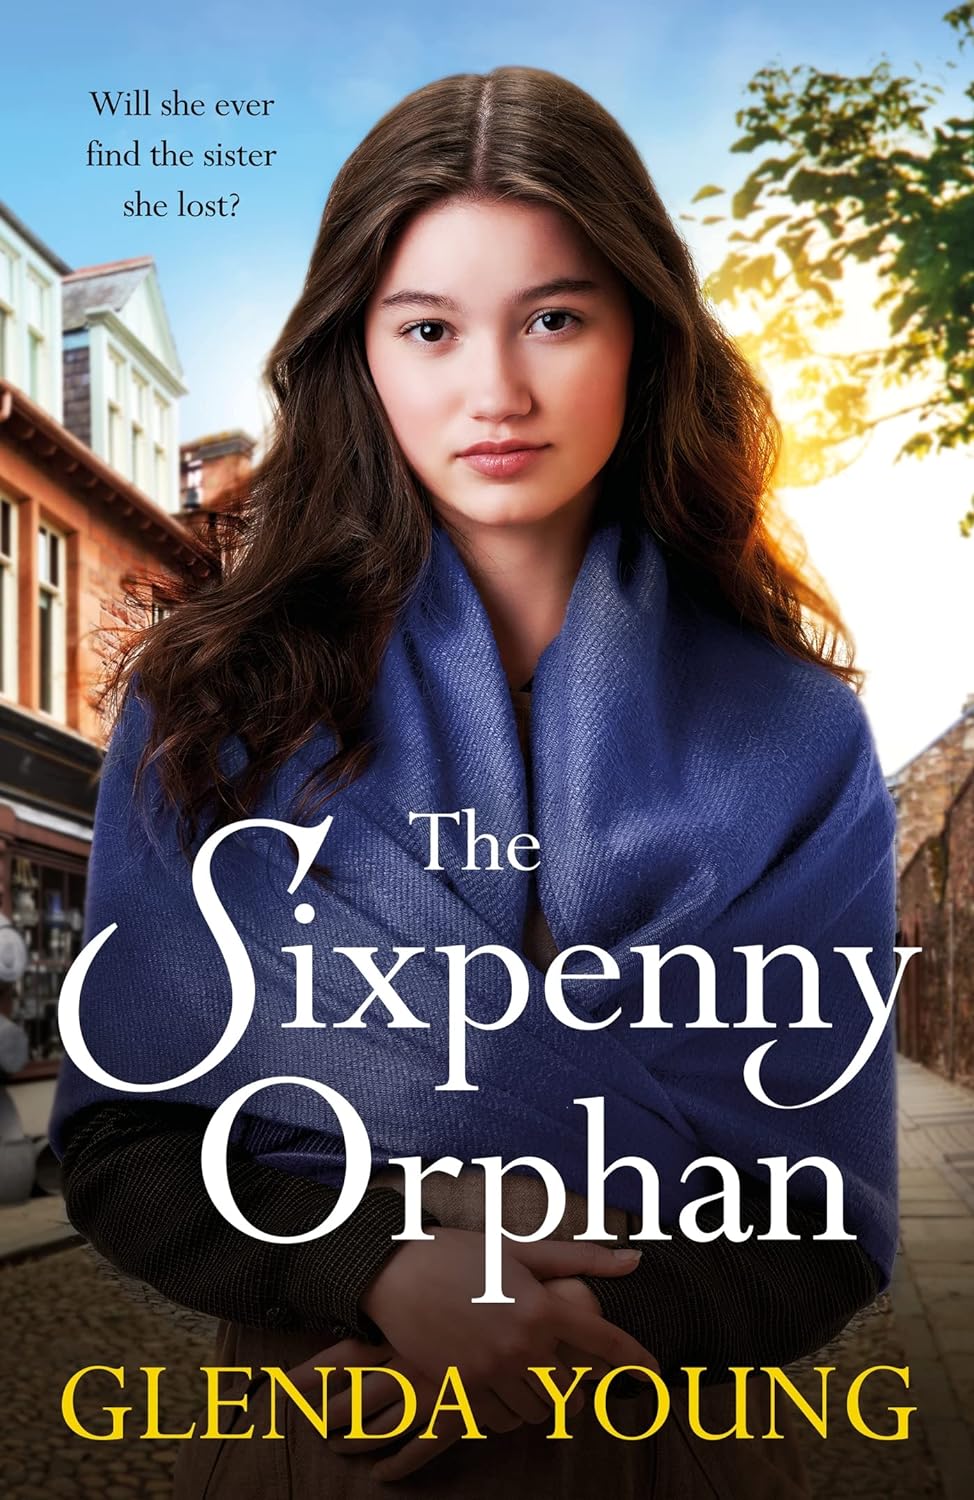 Last Chance! The Sixpenny Orphan: A dramatically heartwrenching saga of two sisters, torn apart by tragic events - Only £19.99!